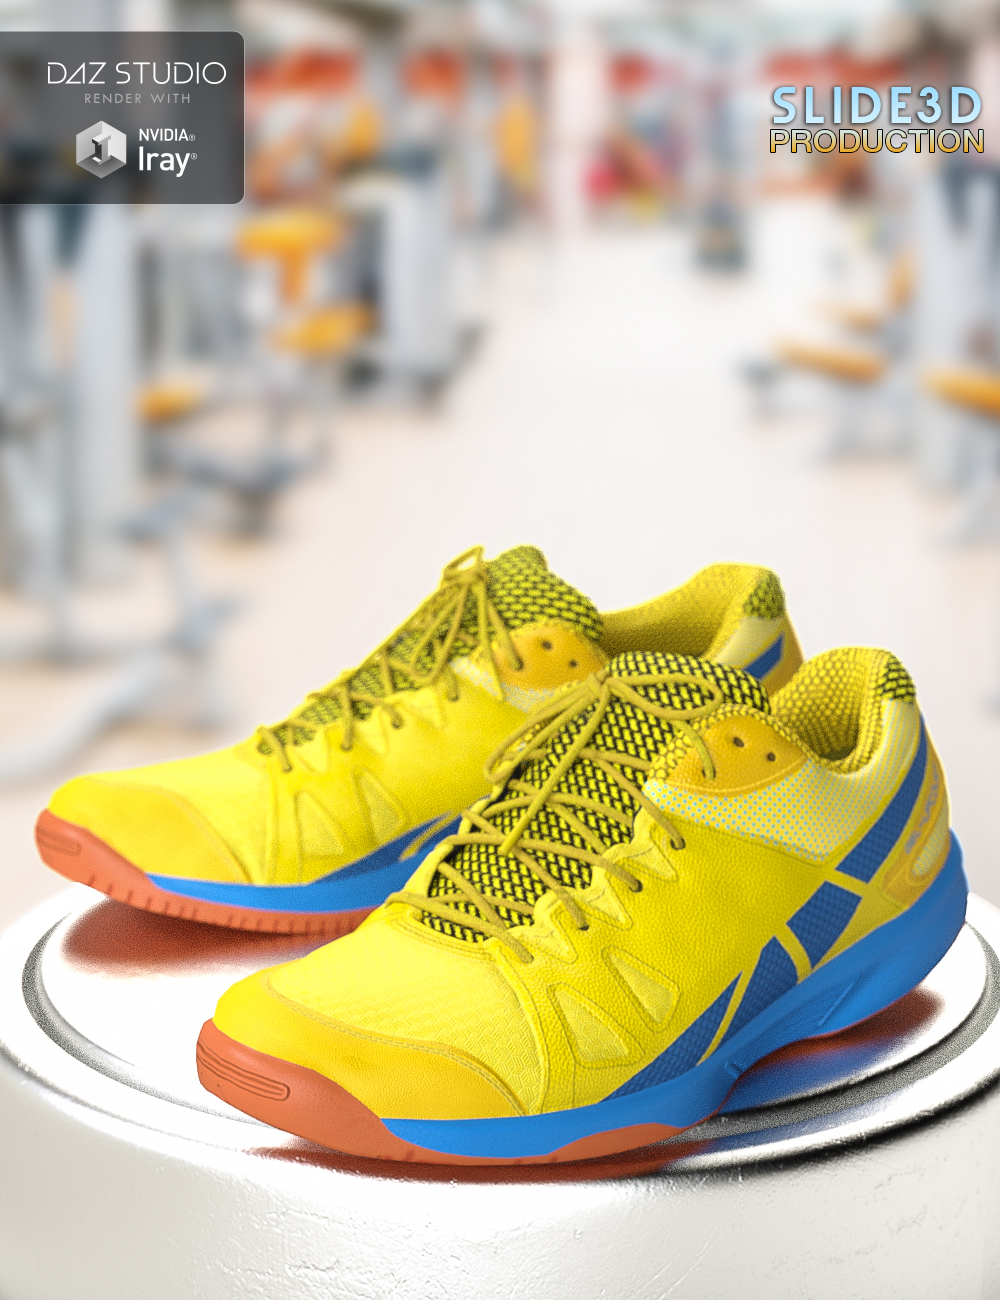 Slide3D Real Sneakers for Genesis 3 Female(s) Texture Addon by: Slide3D, 3D Models by Daz 3D